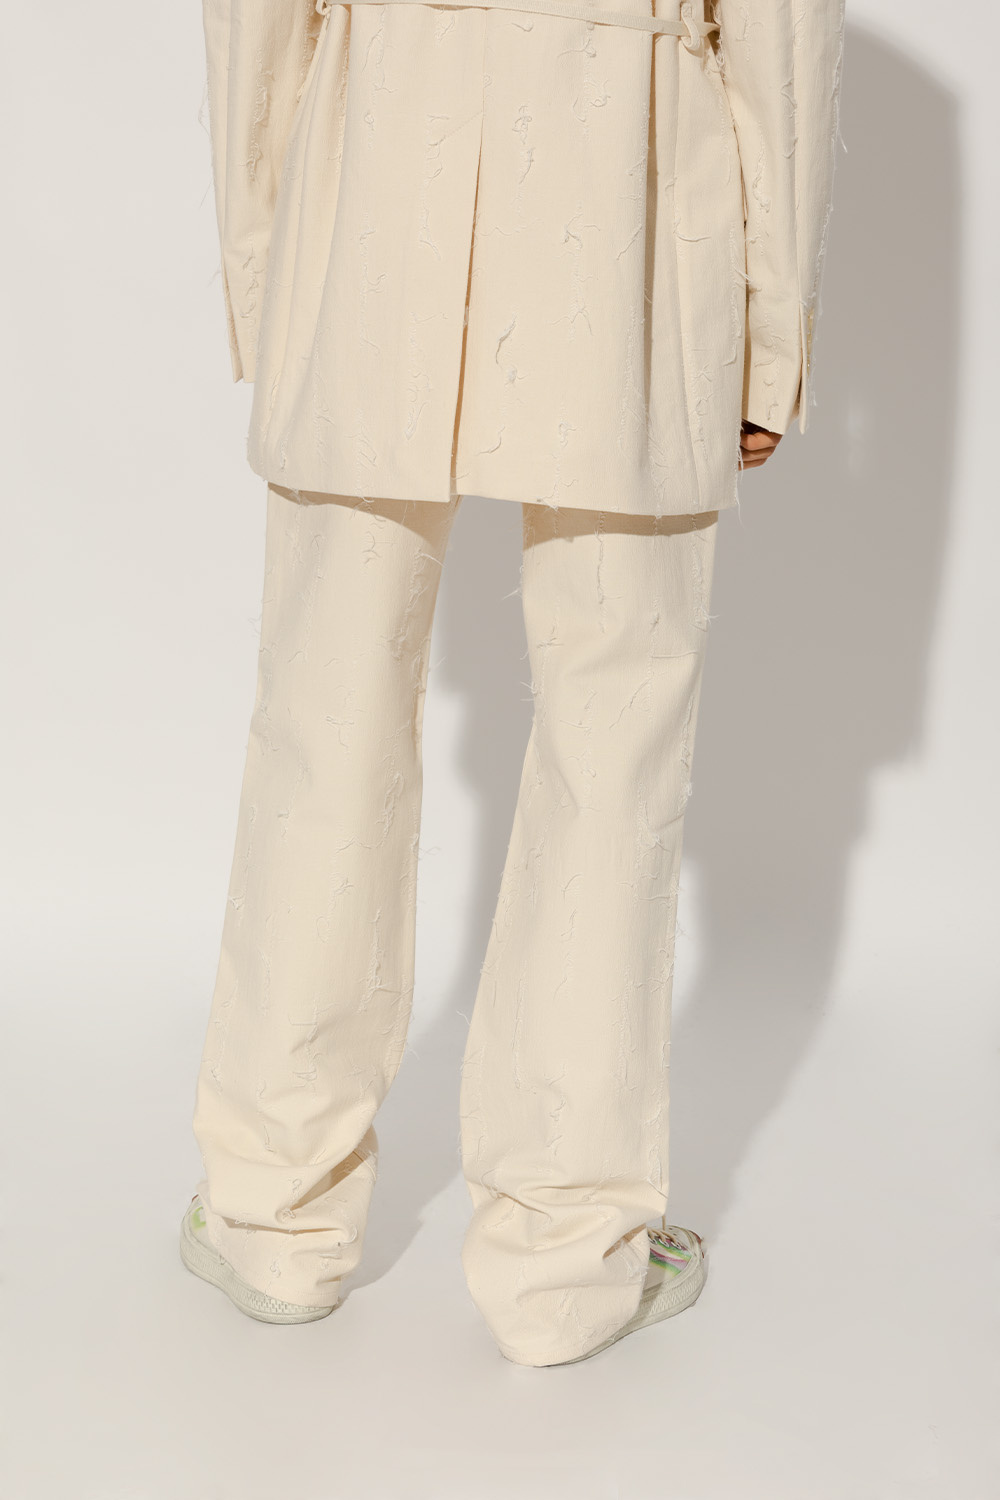 Acne Studios Embroidered trousers